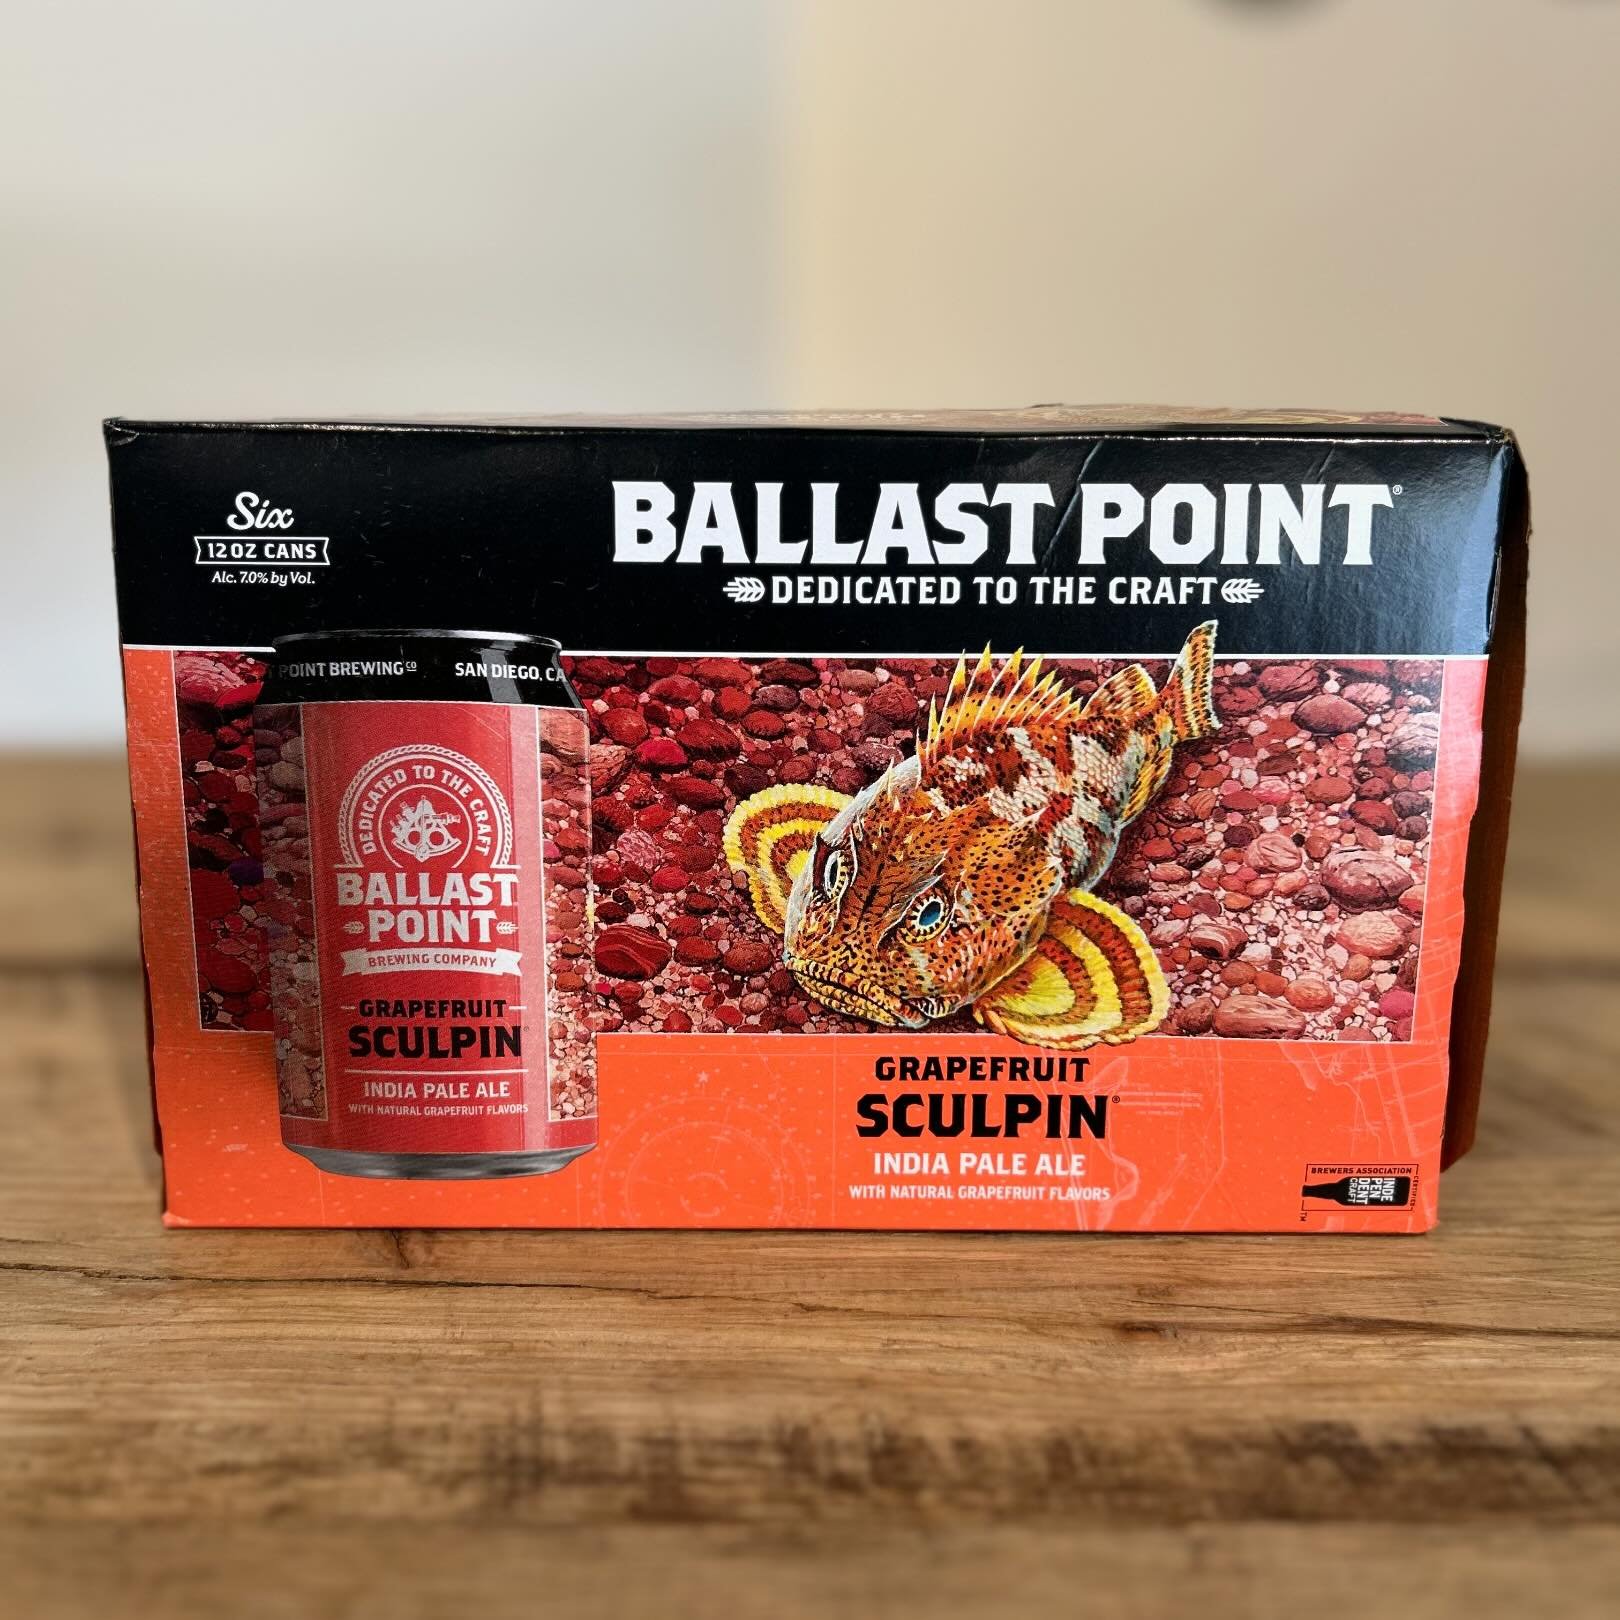 Ya&rsquo;ll have been asking&hellip; @ballastpointbrewing #NowAvailable #SudburyCraftBeer #SudburyMA
&mdash;
Our Grapefruit Sculpin adds a fresh squeeze of tangy bitterness to our signature IPA. Some may say there are few ways to improve Sculpin&rsqu